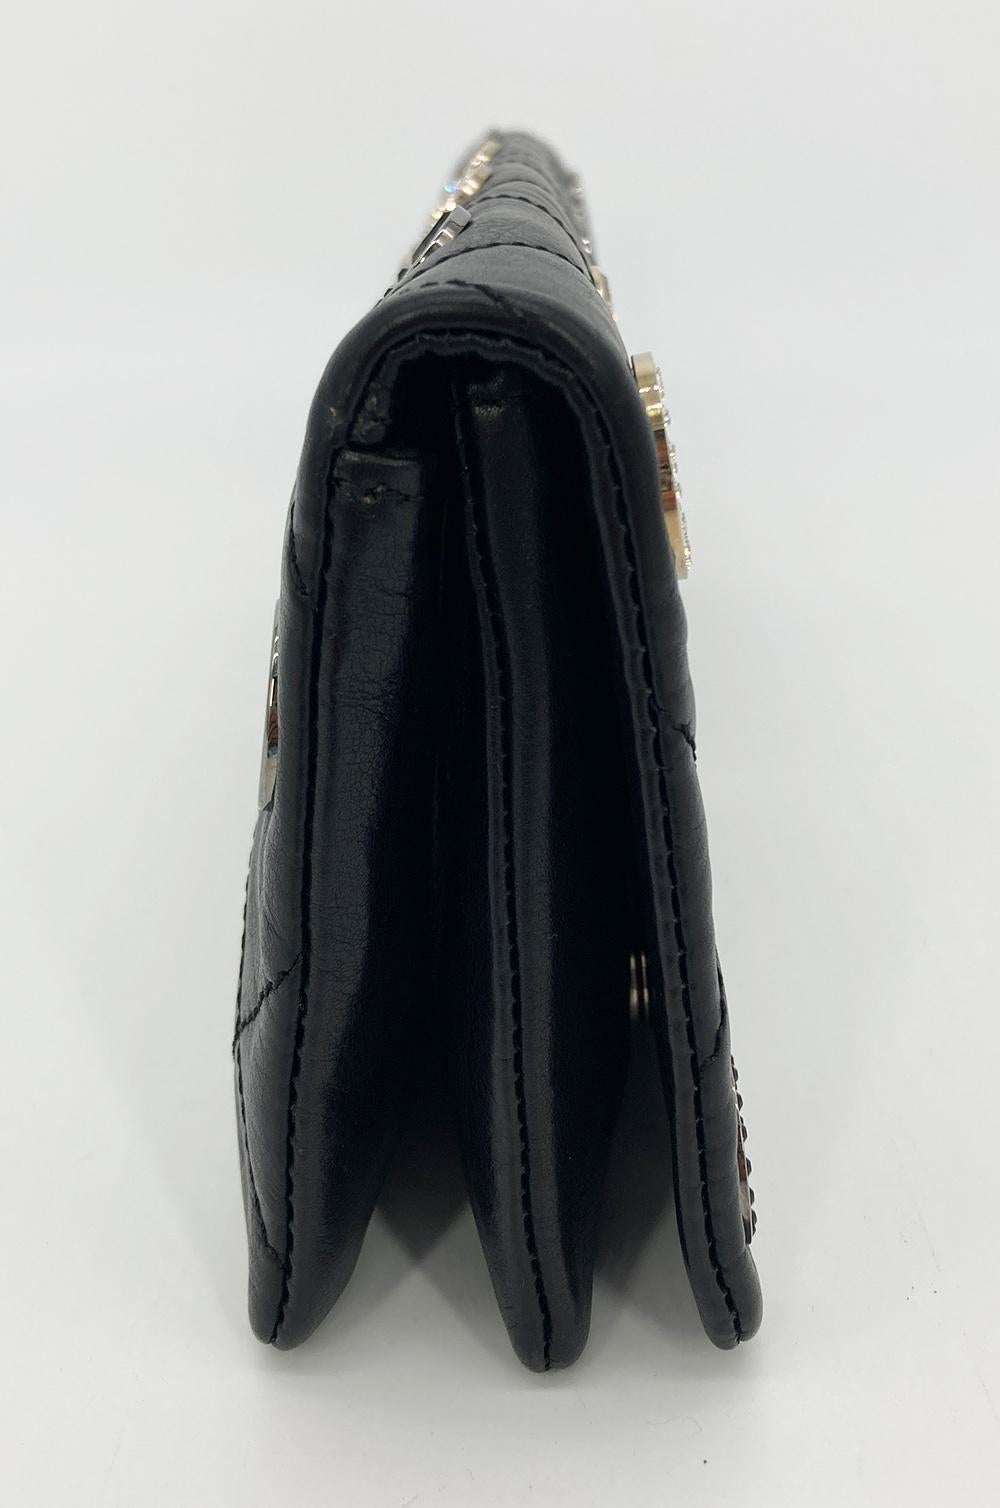 Limited Edition Chanel Black Leather Crystal Grommet Clutch in excellent condition. Black leather exterior trimmed with silver and gold various embellished metal grommets. Front flap closure opens to a black canvas interior with 2 side and 1